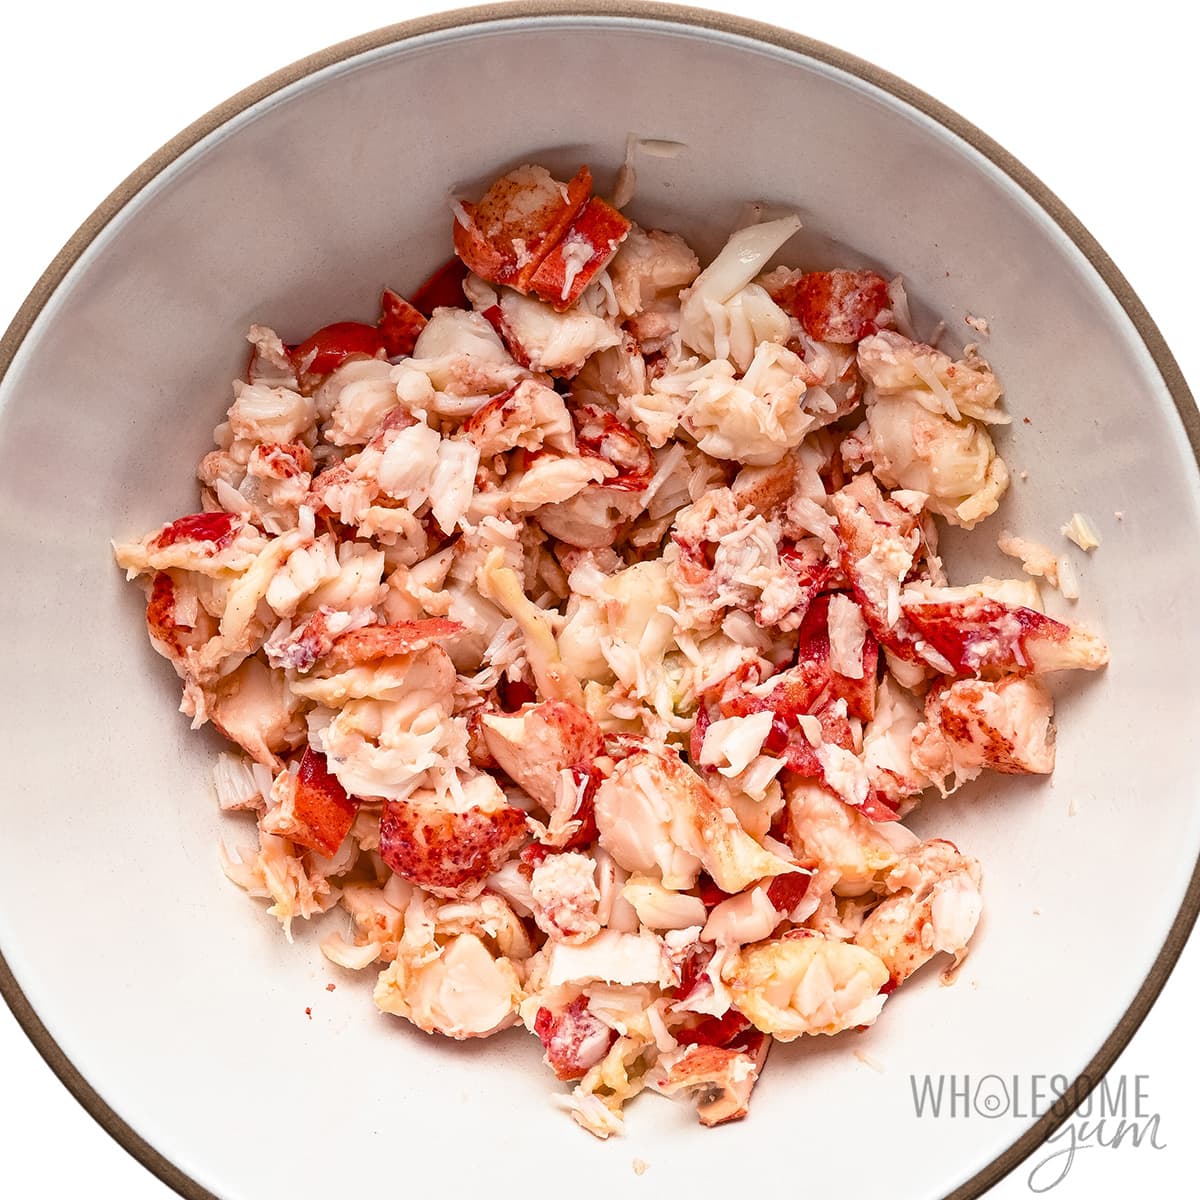 Place small pieces of lobster meat into a bowl.